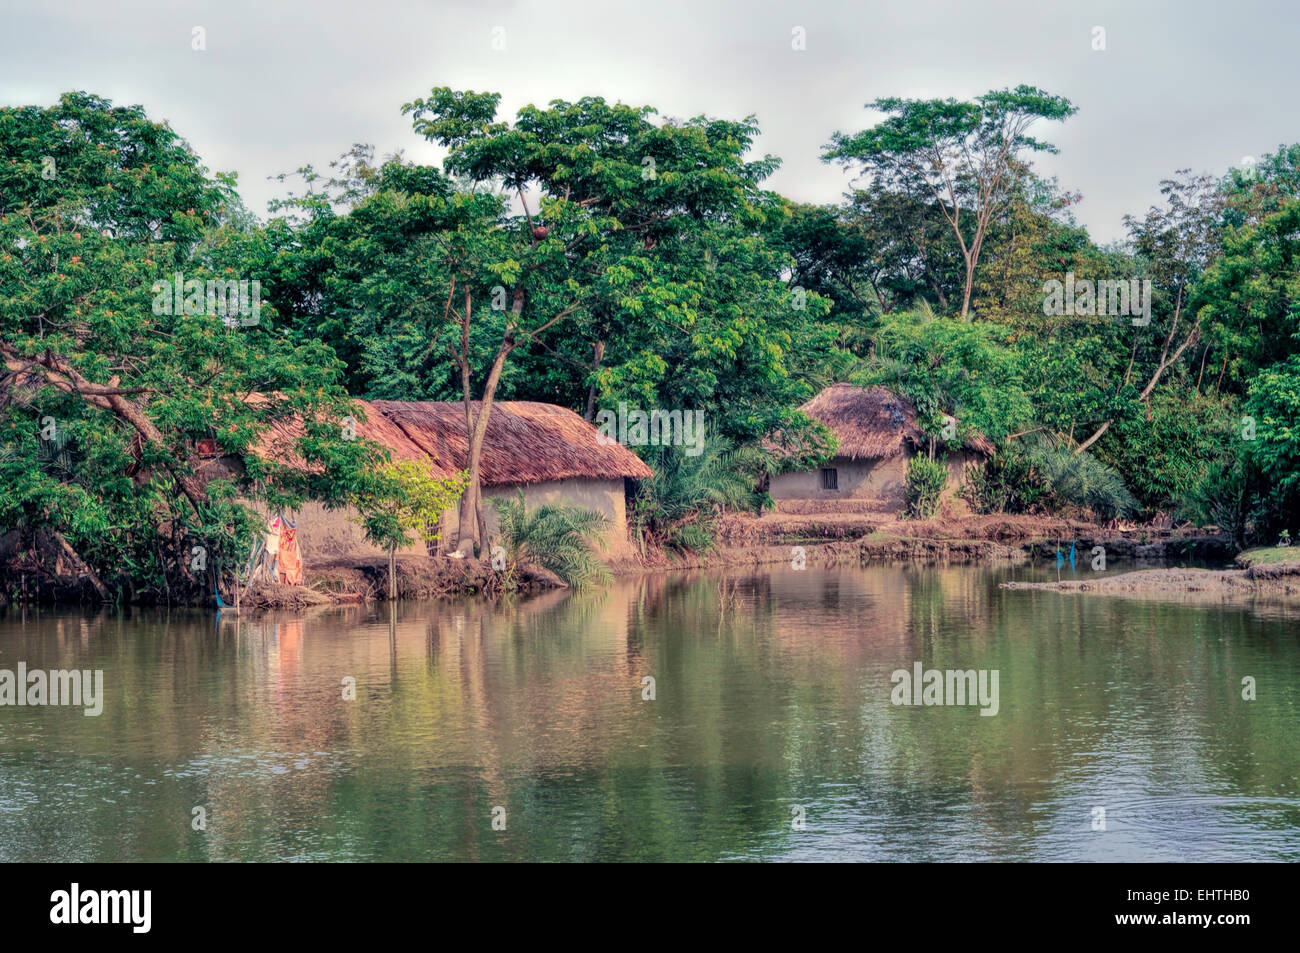 Scenic view of traditional village in Bangladesh Stock Photo